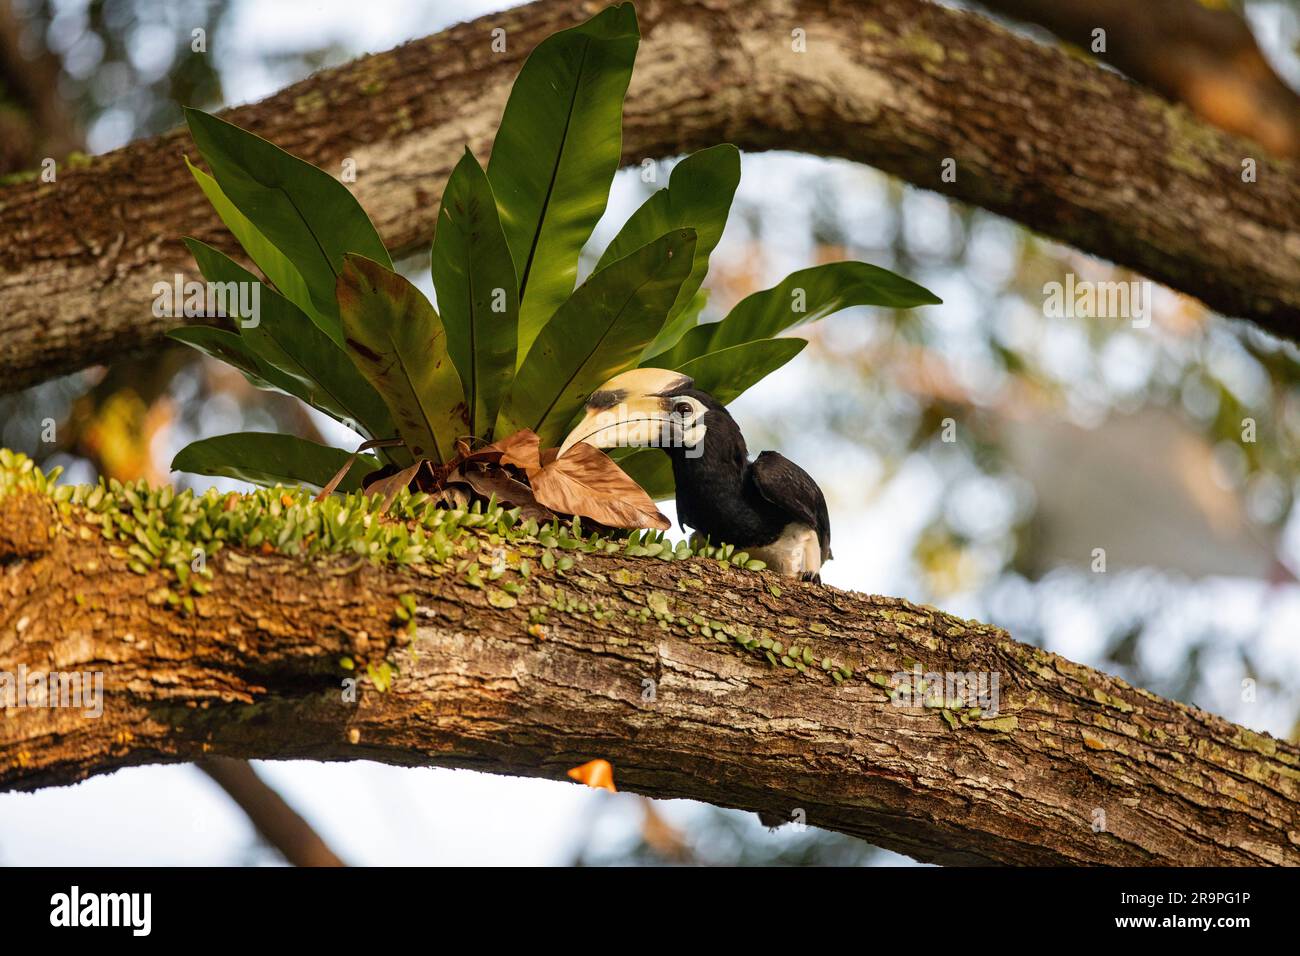 A young male oriental pied hornbill forages amongst tree ferns in a park, Singapore Stock Photo